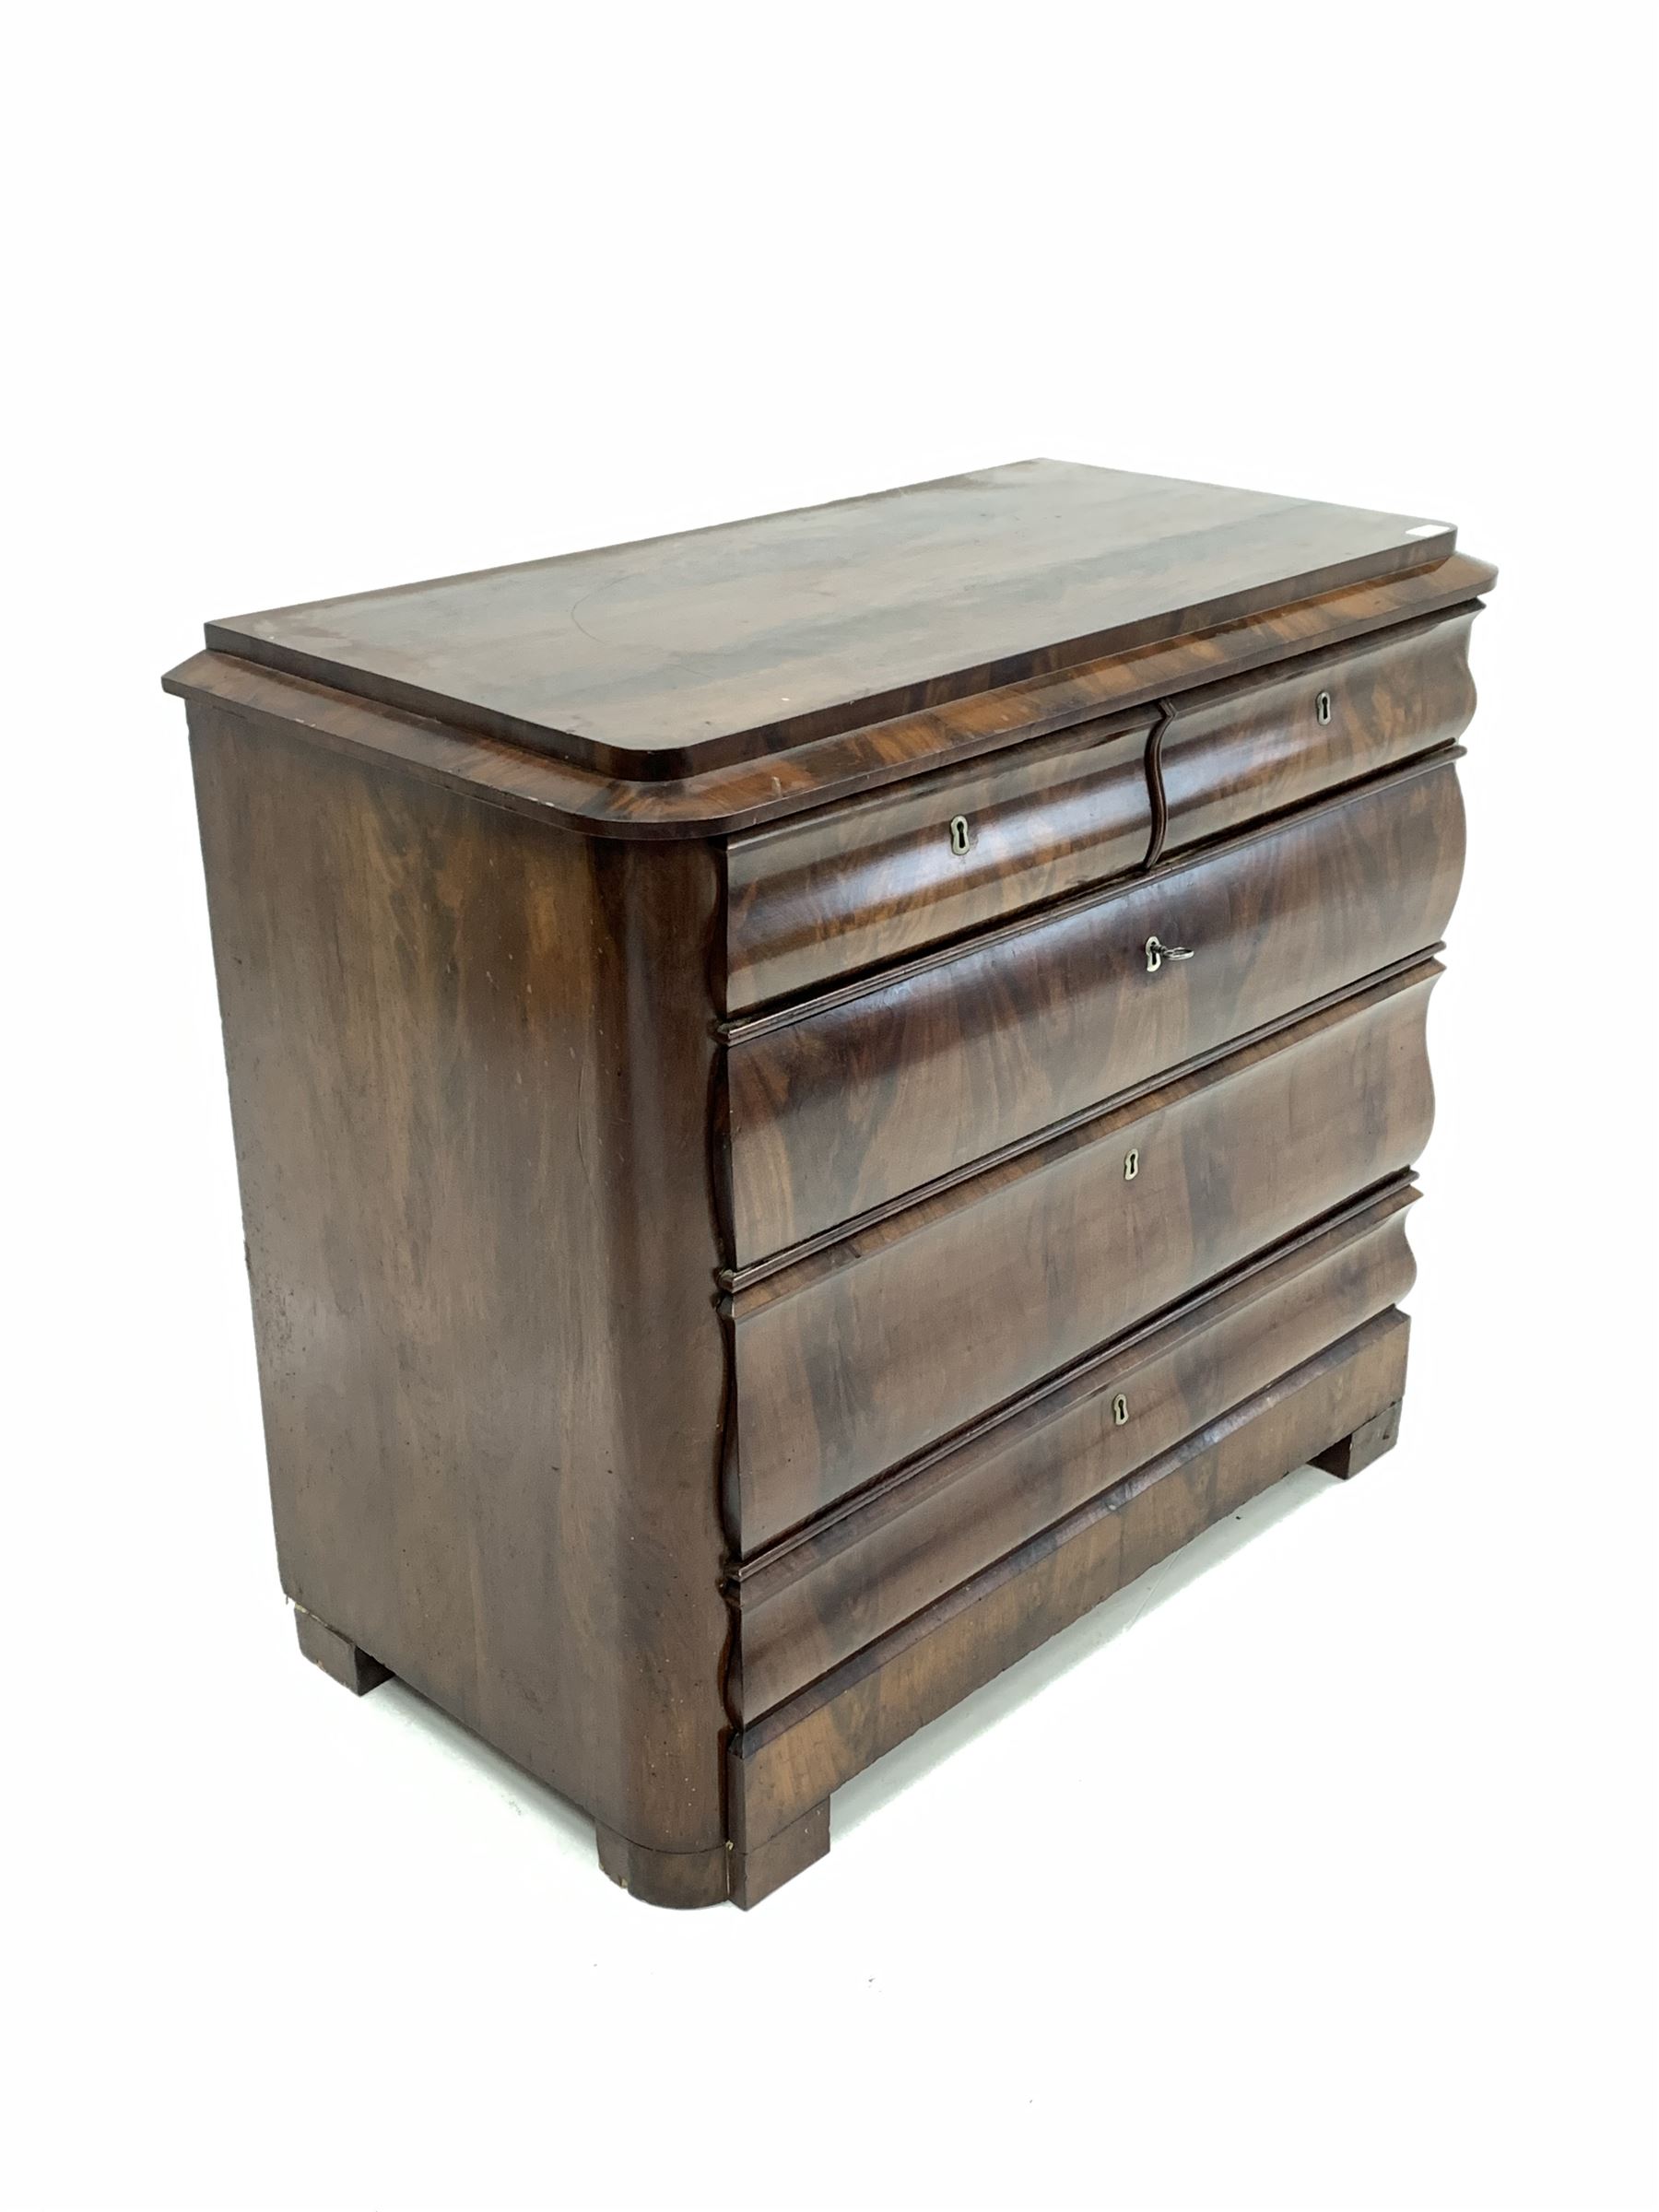 19th century continental mahogany four drawer chest - Image 2 of 7